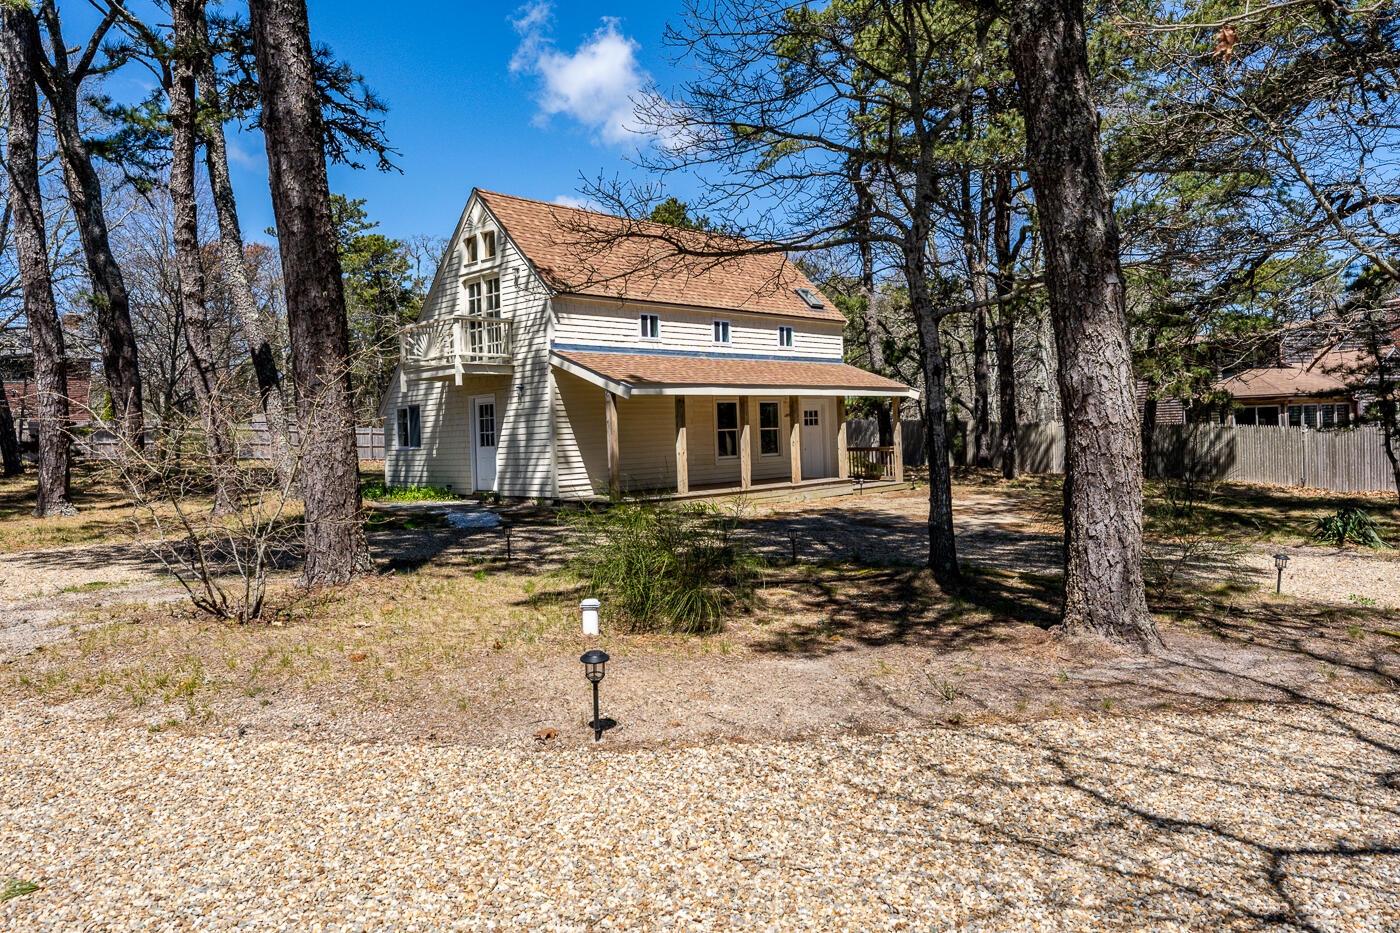 587 State Highway Route 6, Wellfleet, Massachusetts 02667, 3 Bedrooms Bedrooms, 4 Rooms Rooms,2 BathroomsBathrooms,Residential,For Sale,587 State Highway Route 6,22401865